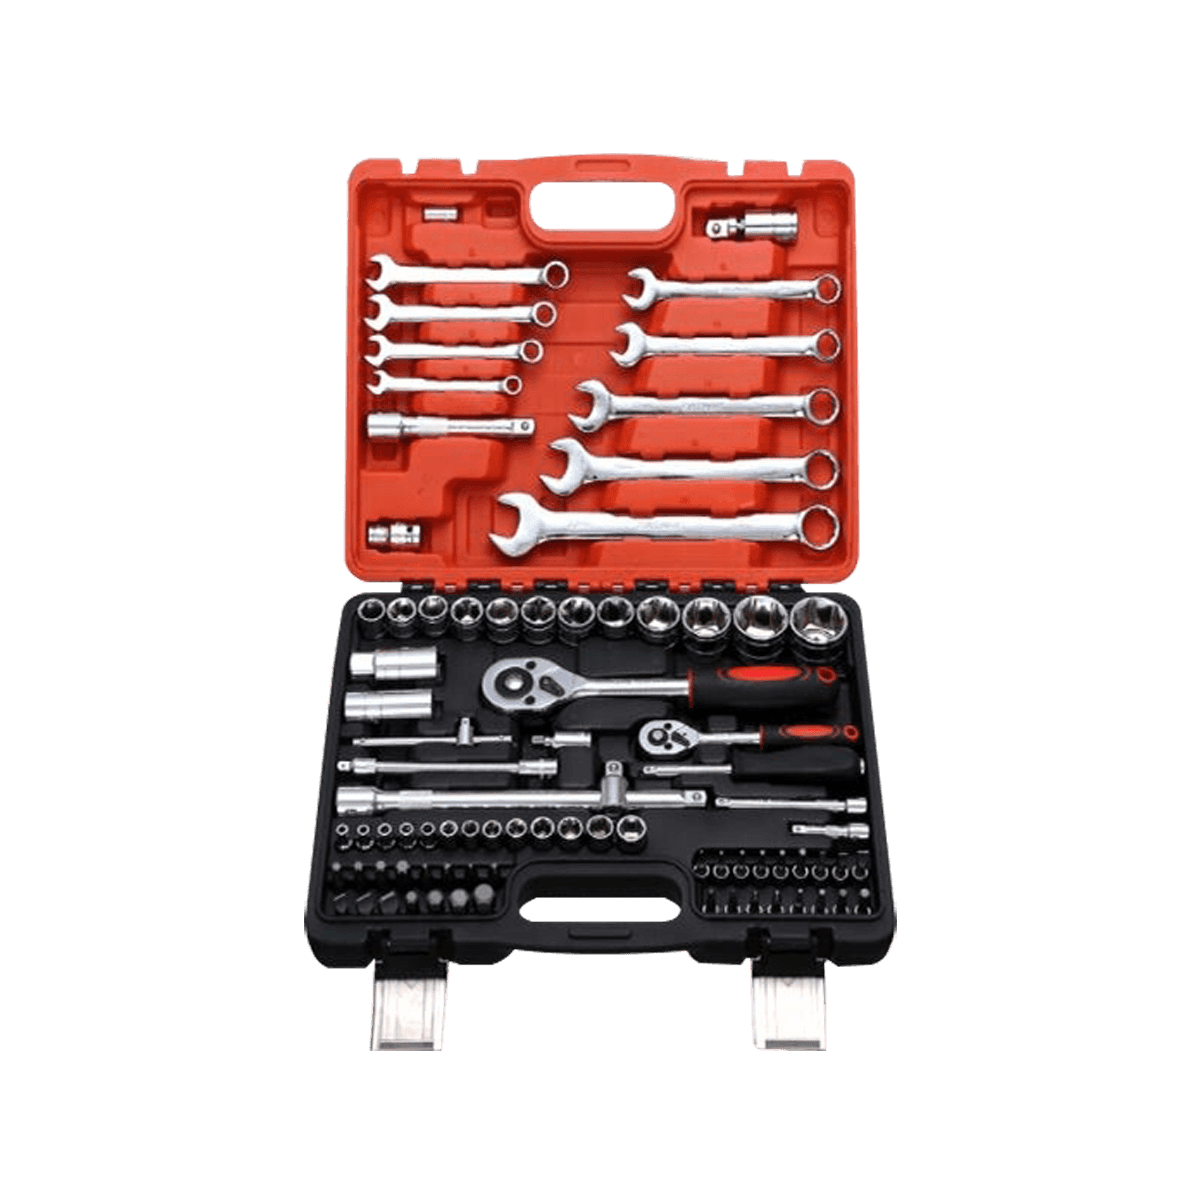 82pcs Spanner Socket Set Multi-functional Wrench Tool Kit Bike Auto Repair Tools Sets With Blow Box